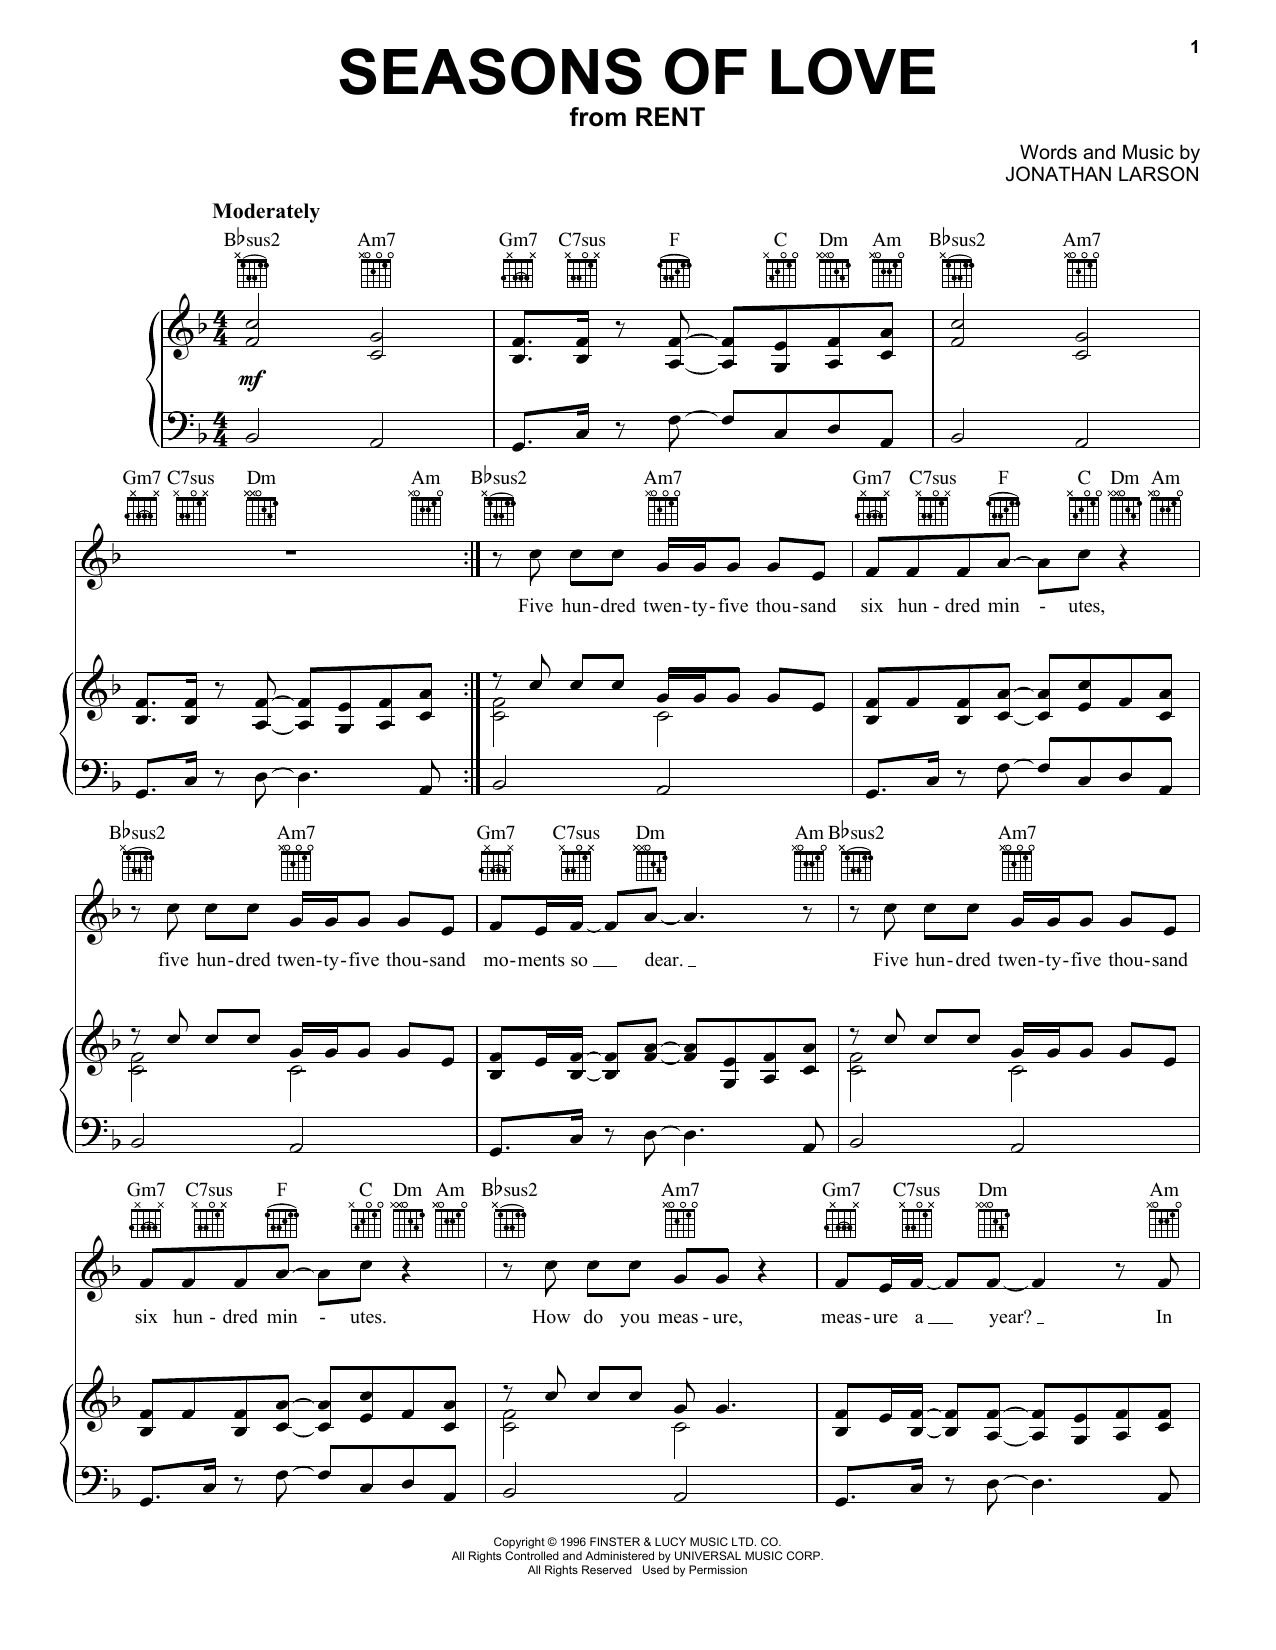 Download Jonathan Larson Seasons Of Love sheet music notes and chords for Piano, Vocal & Guitar (Right-Hand Melody) - Download Printable PDF and start playing in minutes.